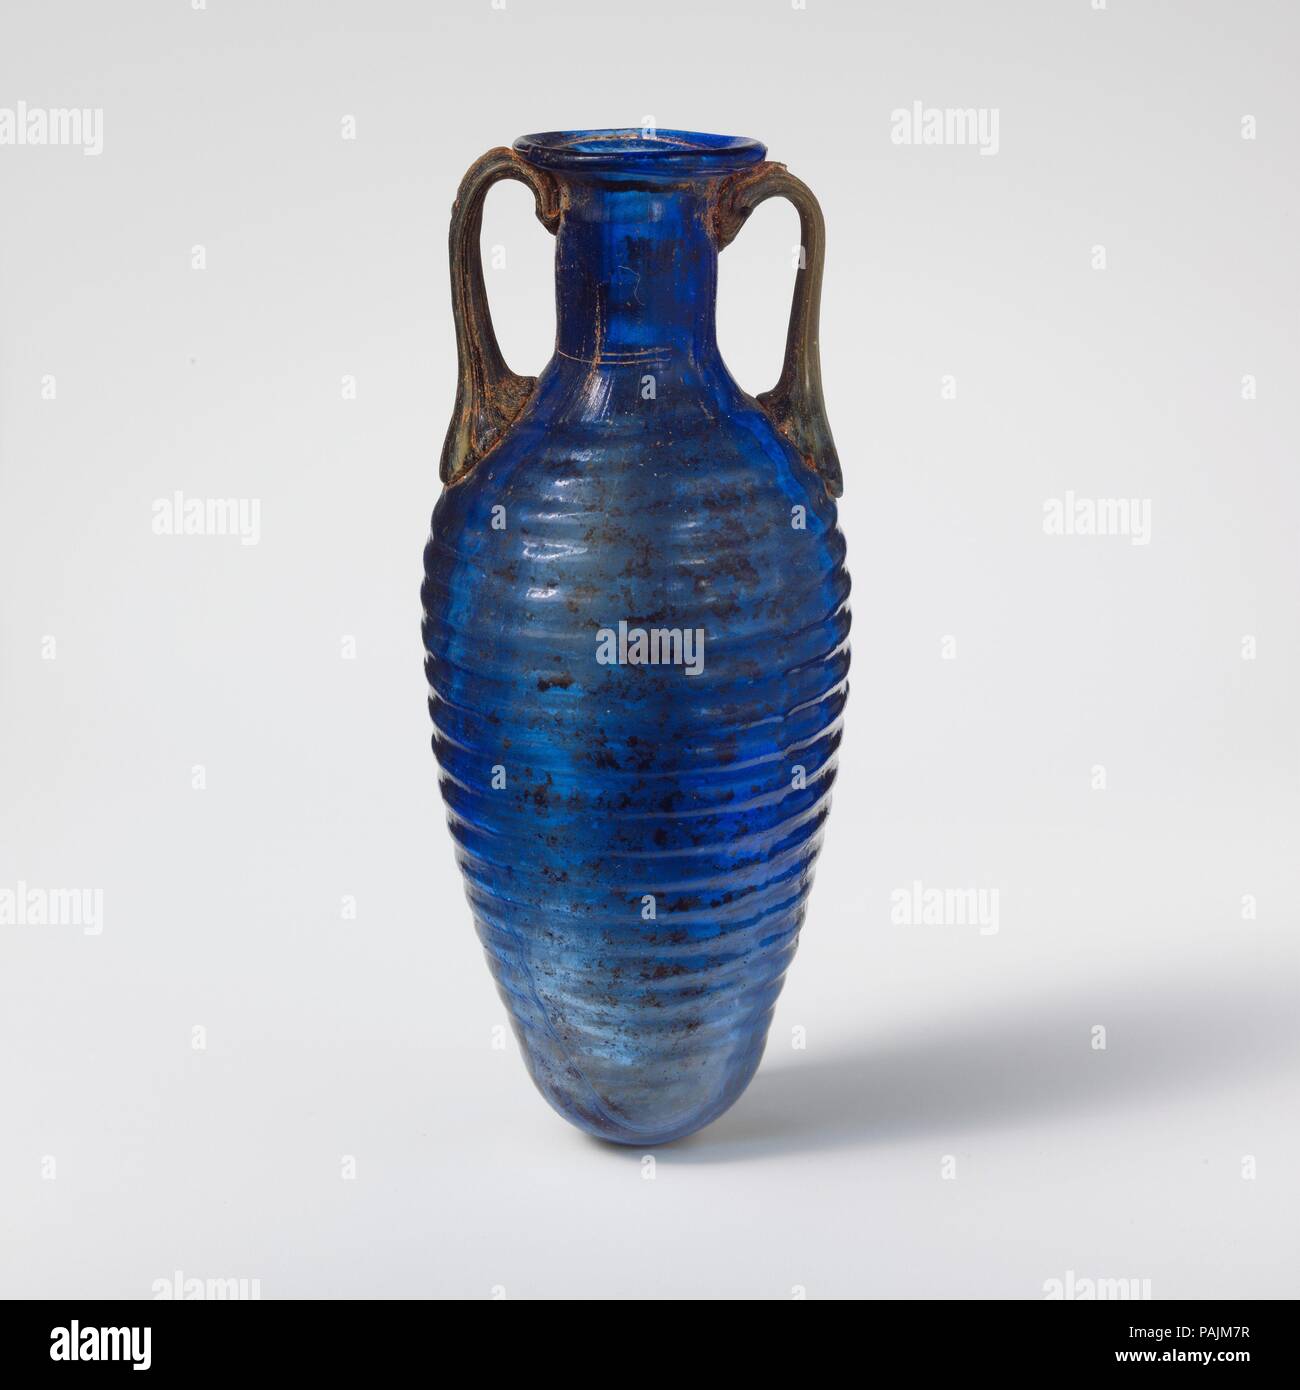 Glass amphoriskos with horizontal ribs. Culture: Roman. Dimensions: H. 4 5/16 in. (11 cm); diameter 1 13/16 in. (4.6 cm). Date: 2nd half of 1st century A.D..  Translucent cobalt blue, with handles in a semi-opaque mixture of blue, white, and yellowish brown.  Rim folded out, over, and in; flaring, uneven mouth; cylindrical neck with irregular horizontal ridges and indents around top; ovoid body, tapering to plain, rounded bottom; two rod handles attached to upper body in pads, drawn up and in, then pressed onto top of neck and underside of rim. One continuous mold seam around body, extending t Stock Photo